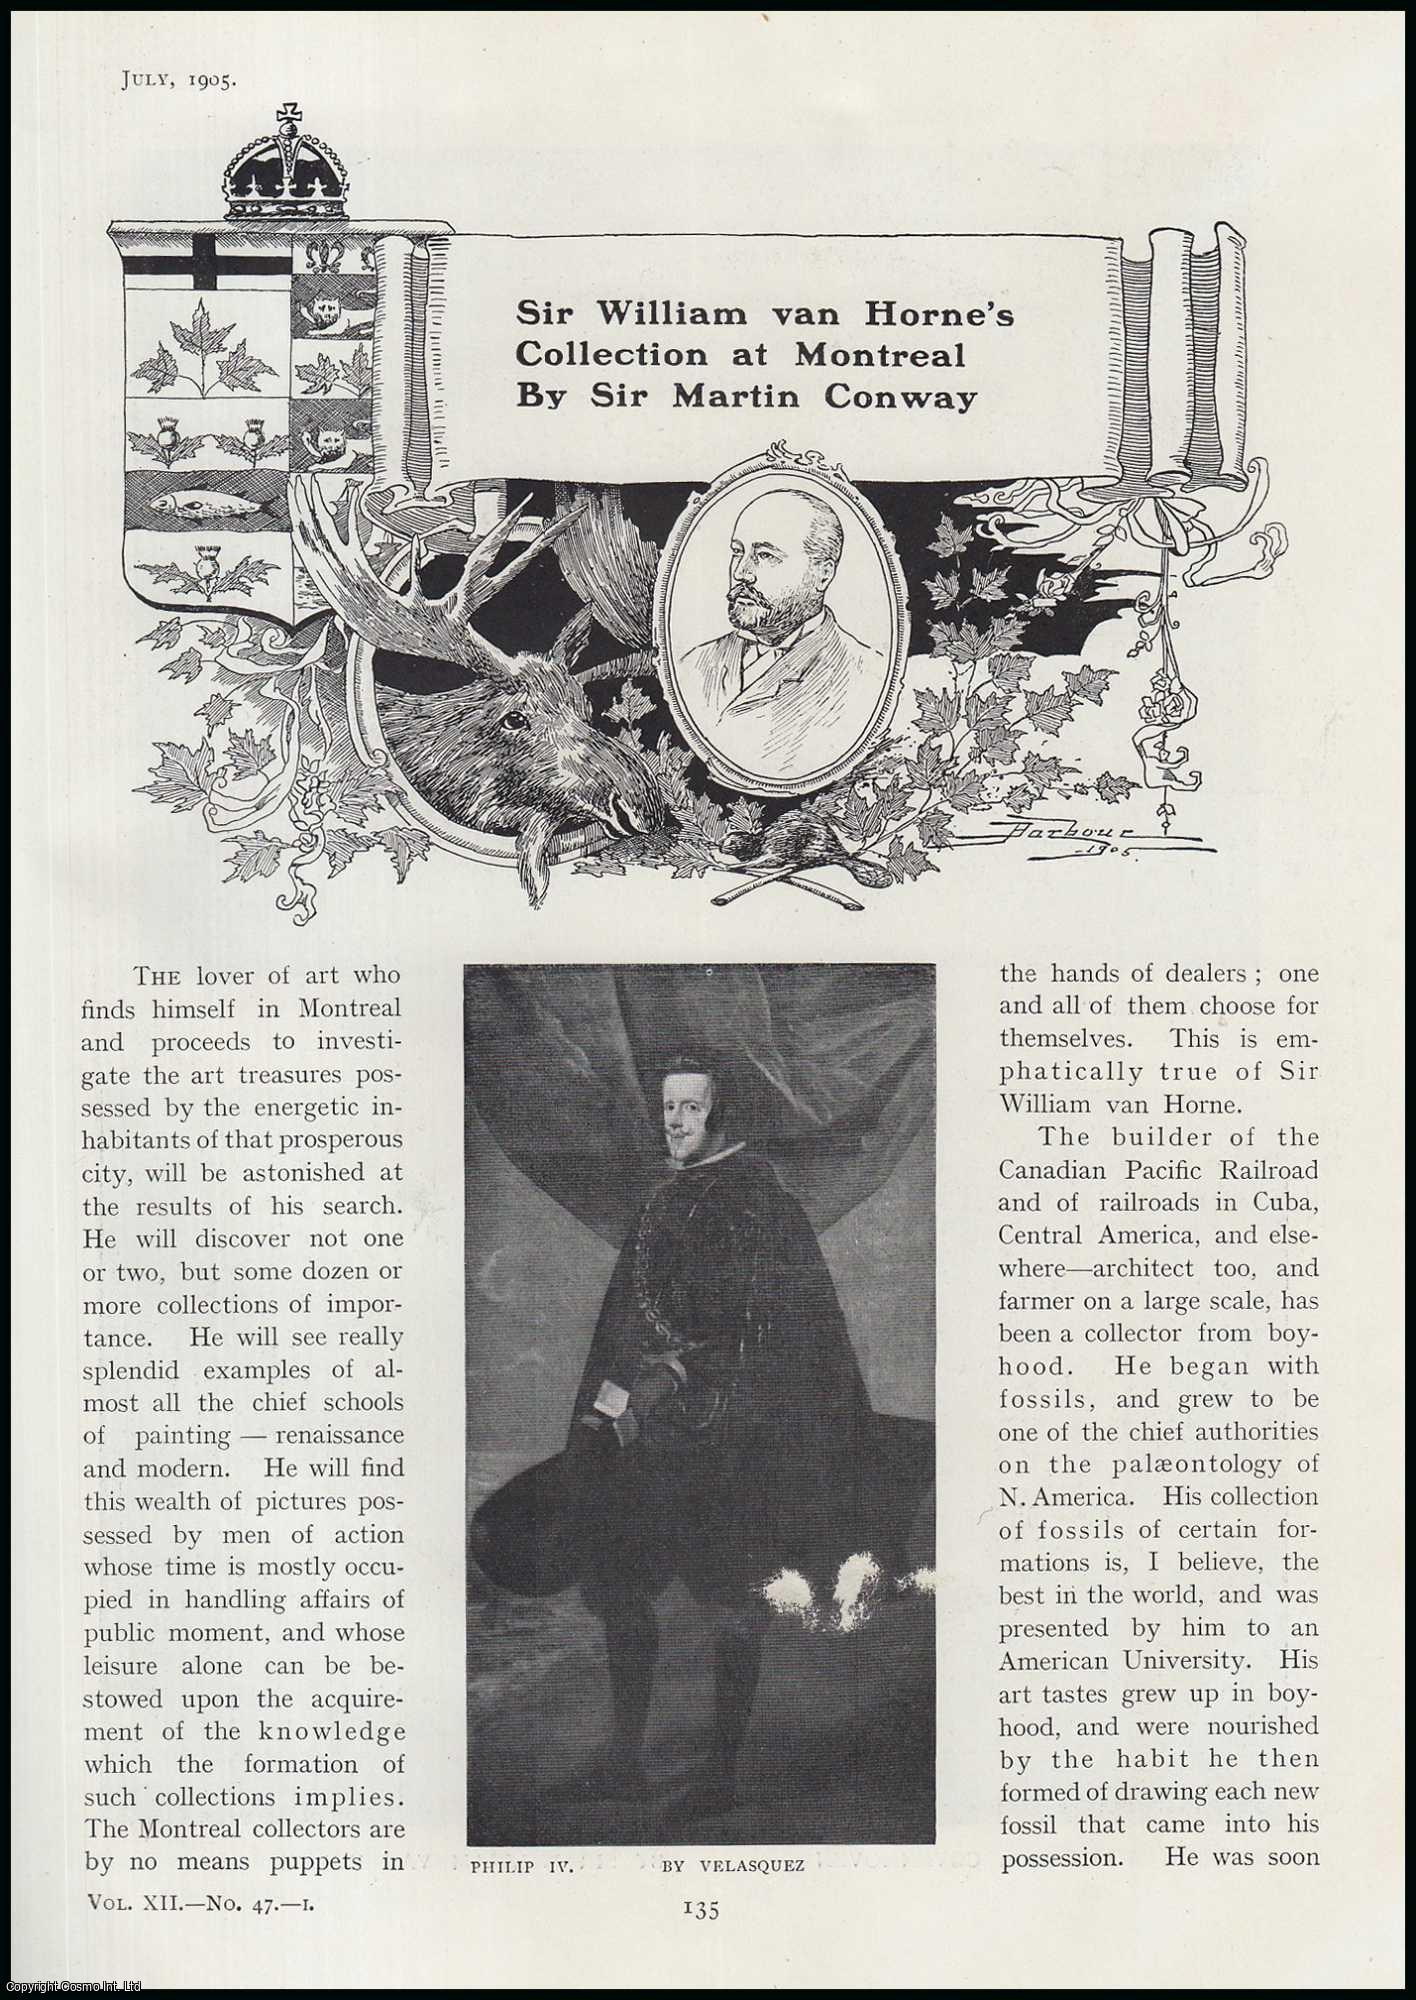 Sir Martin Conway - Sir William Van Horne's Collection at Montreal. An original article from The Connoisseur, 1905.